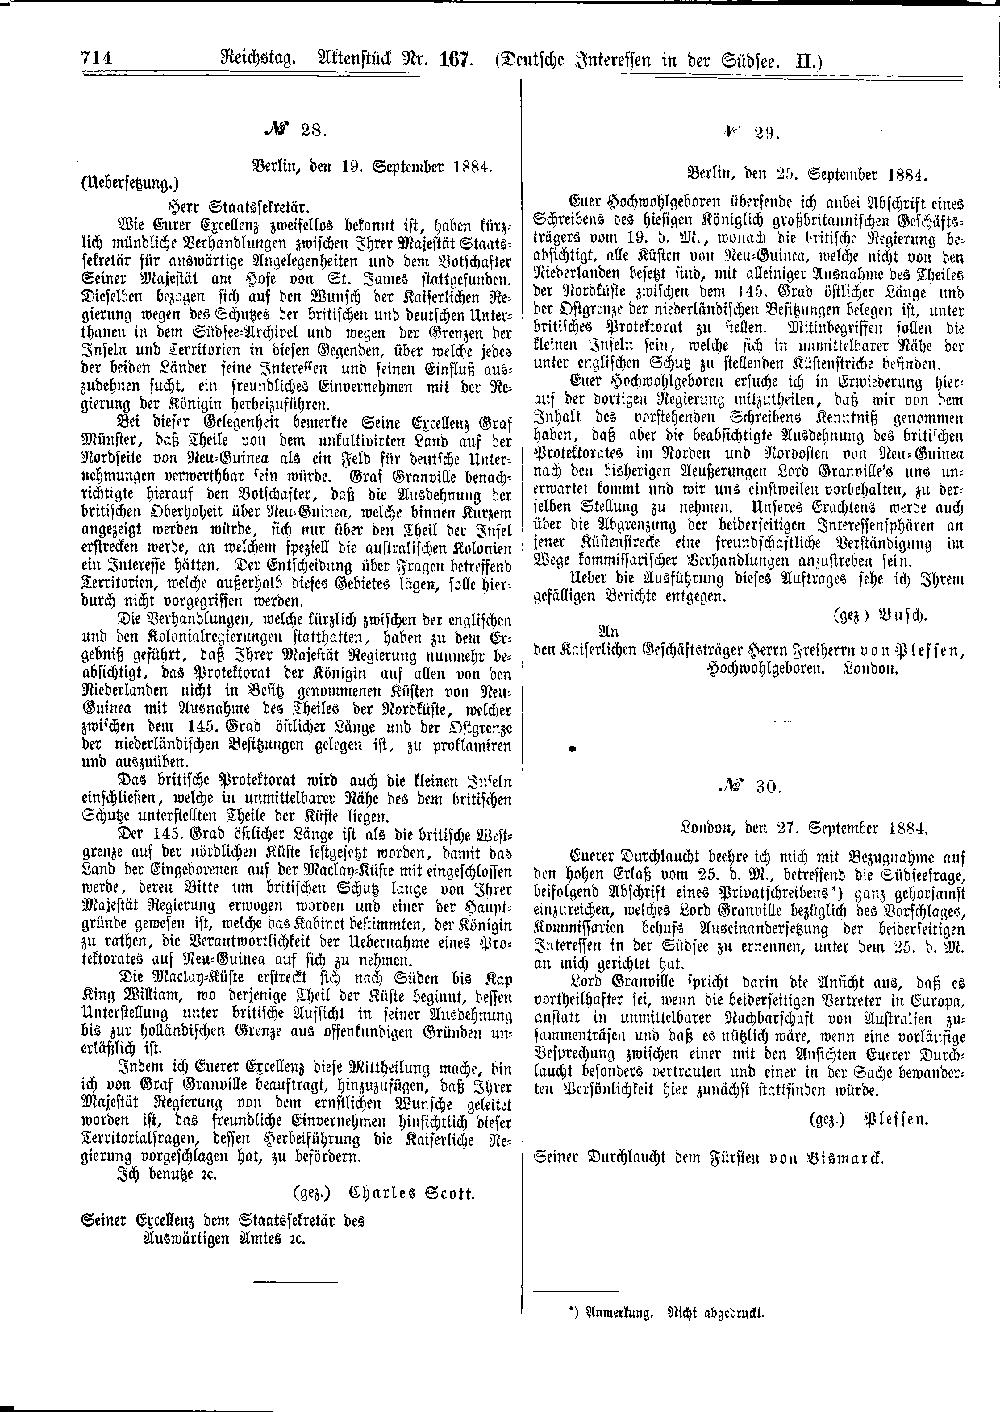 Scan of page 714